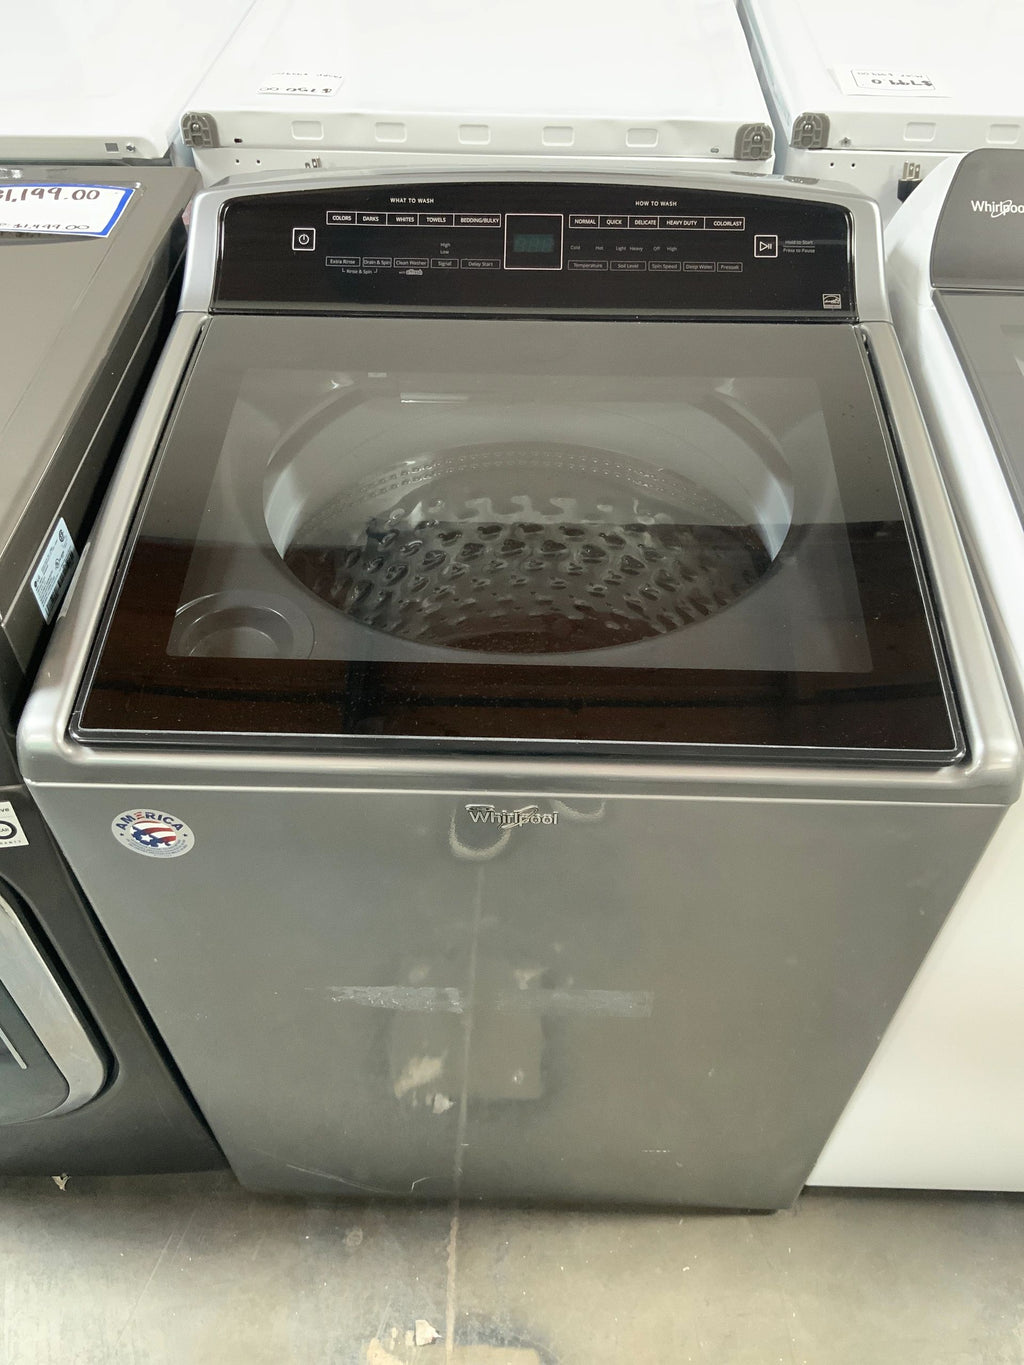 New Open Box. 4.8 cu. ft. High-Efficiency Chrome Shadow Top Load Washer with Built-In Water Faucet in Intuitive Touch Controls. Model: WTW7500GC